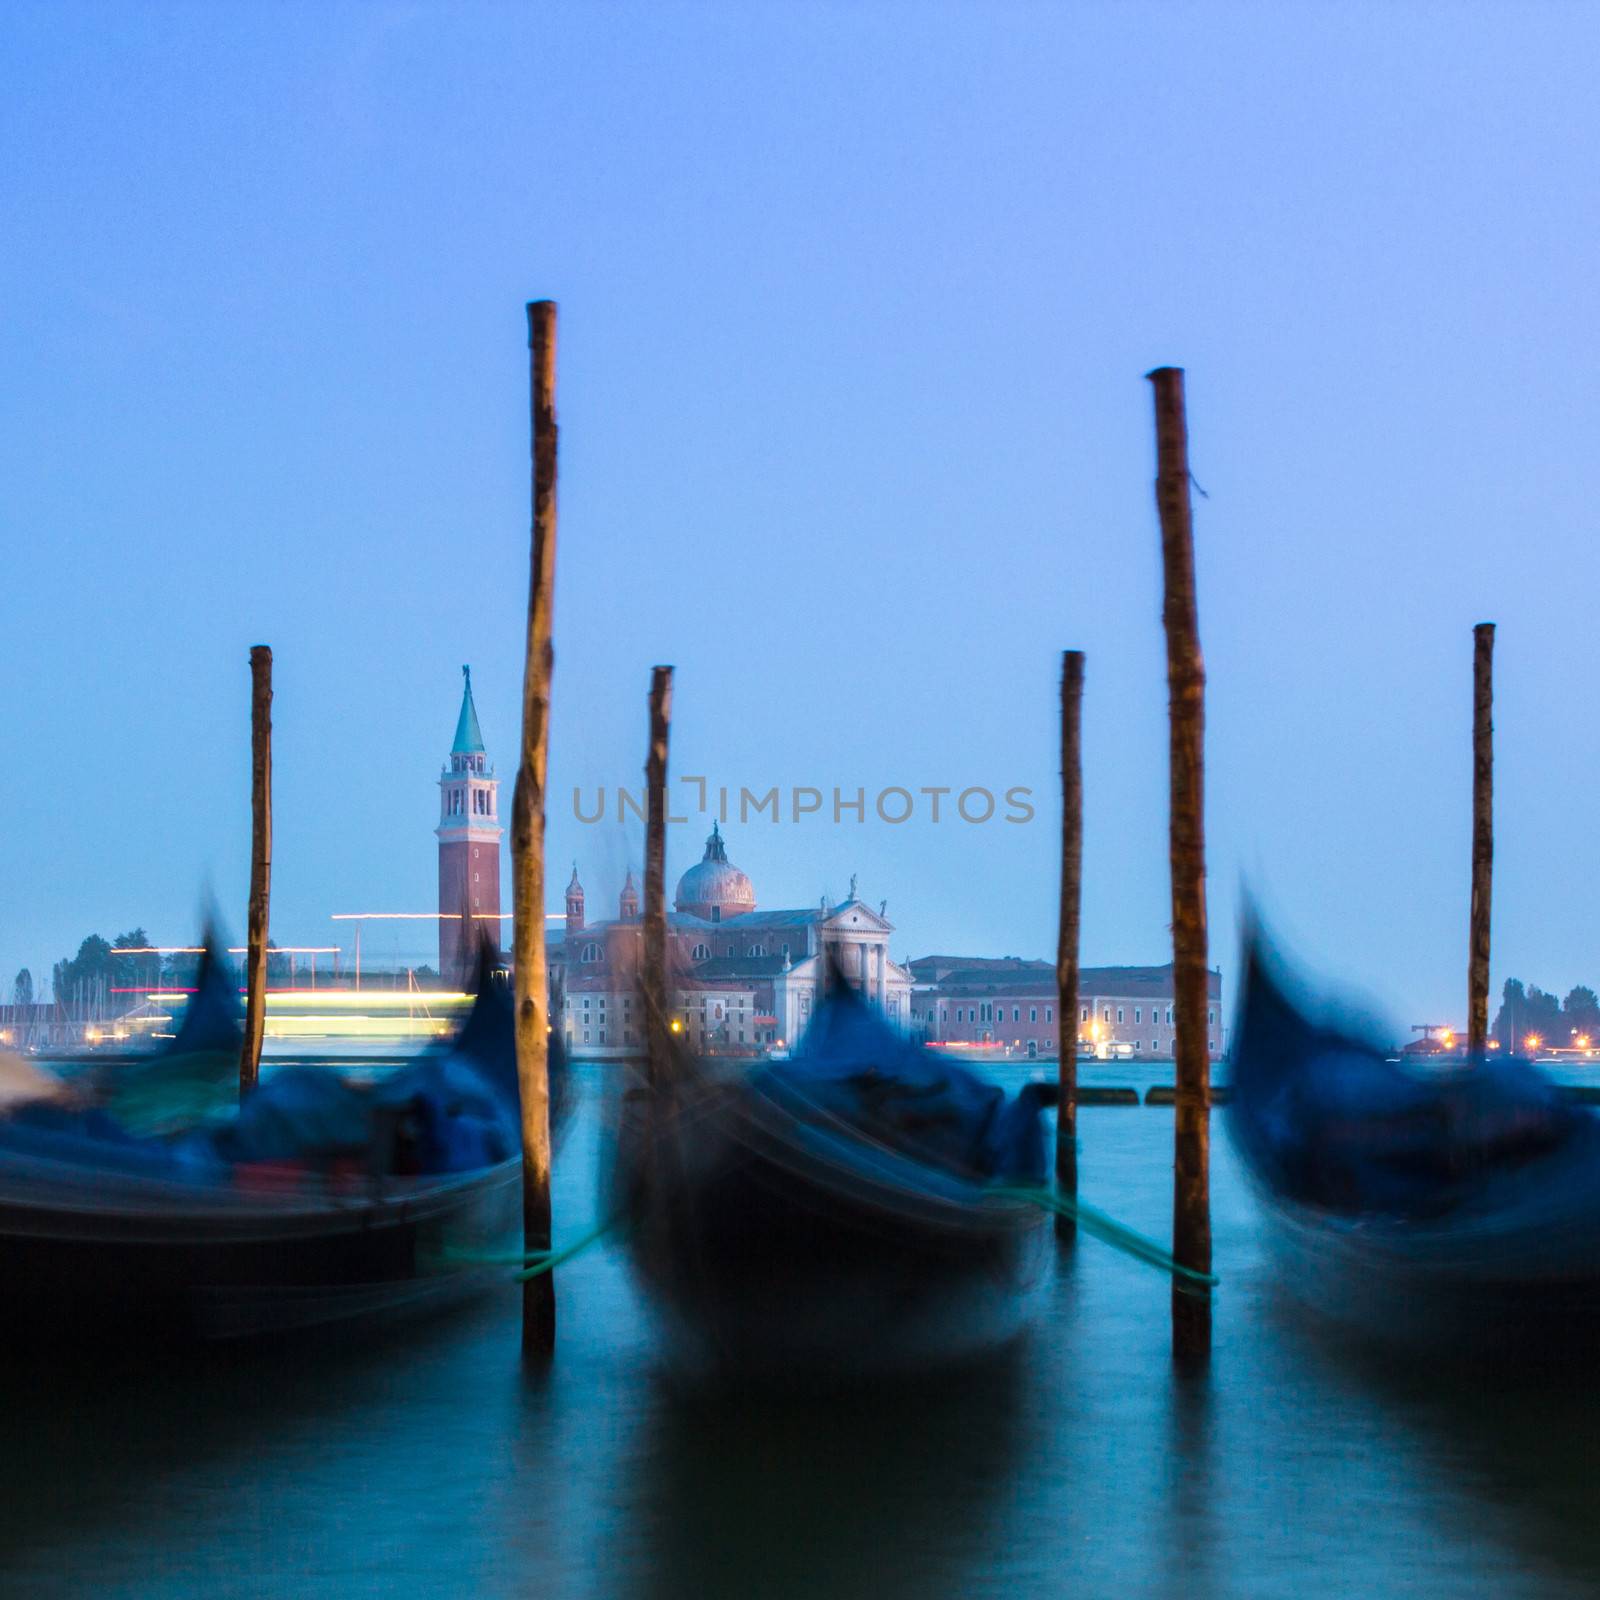 Venice in the evening light with gondolas on Grand Canal against San Giorgio Maggiore church. Italy, Europe. World heritage site.